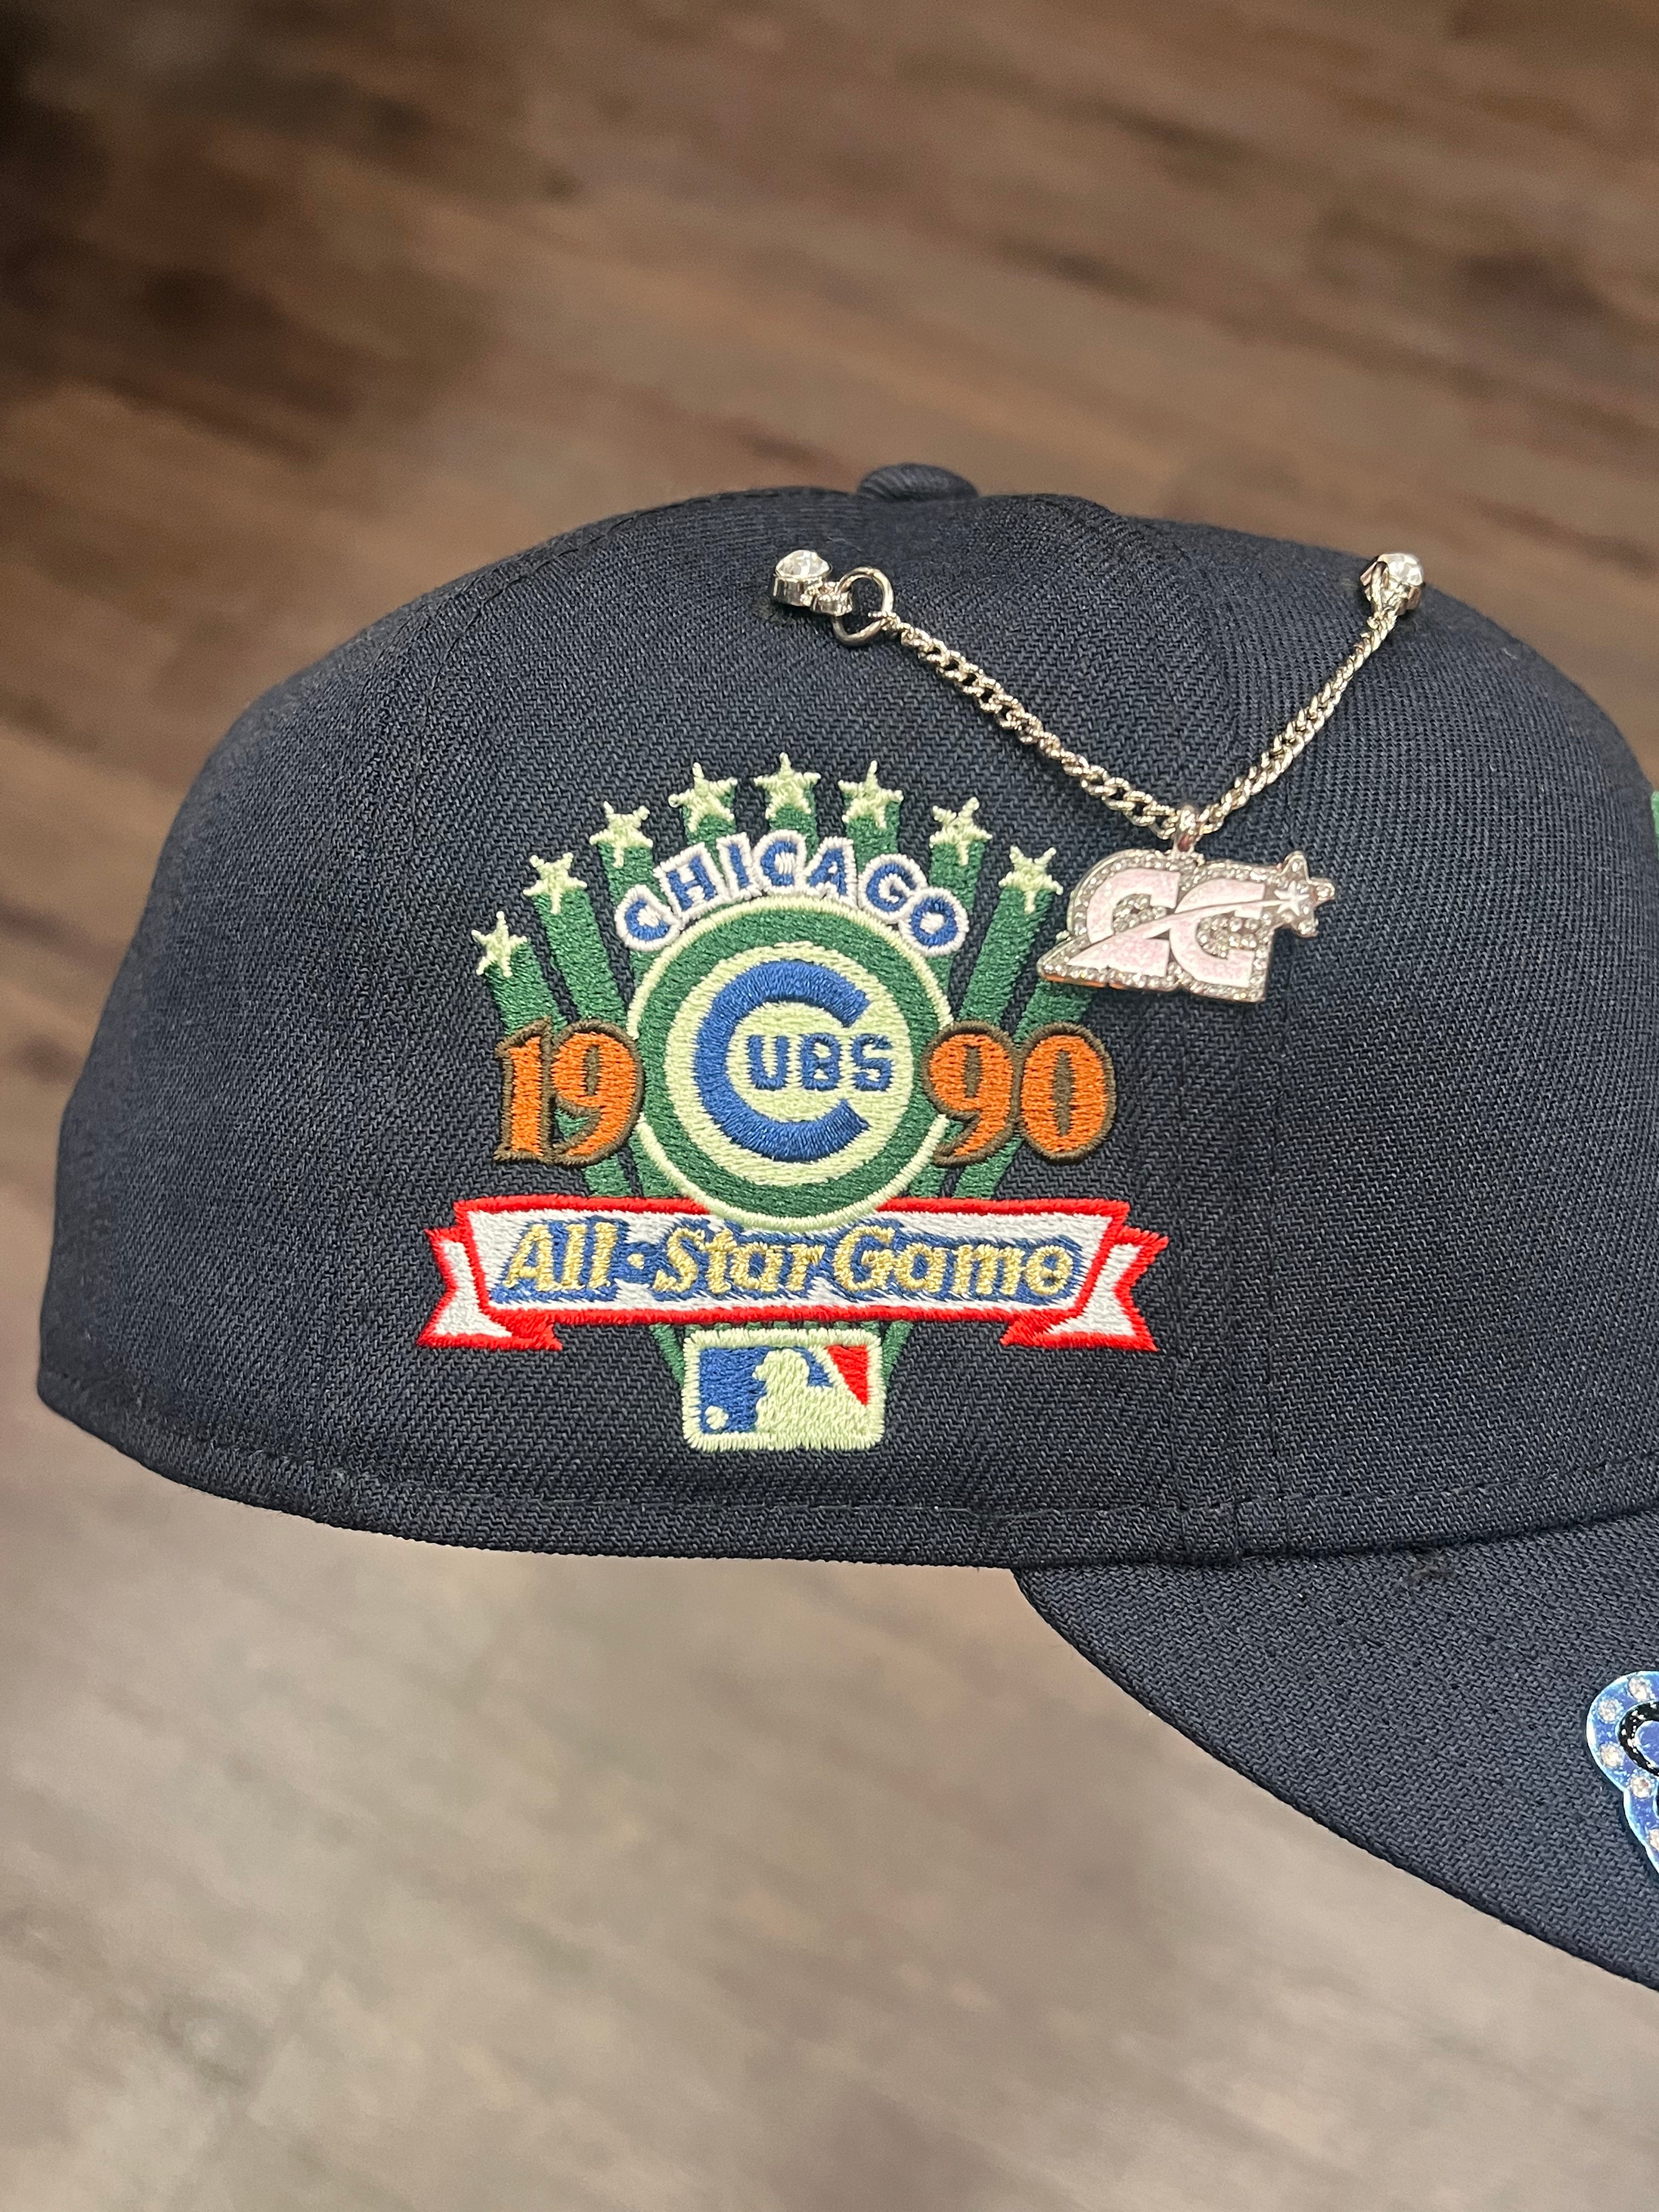 NEW ERA EXCLUSIVE 59FIFTY NAVY CHICAGO CUBS W/ 1990 ALL STAR GAME PATCH